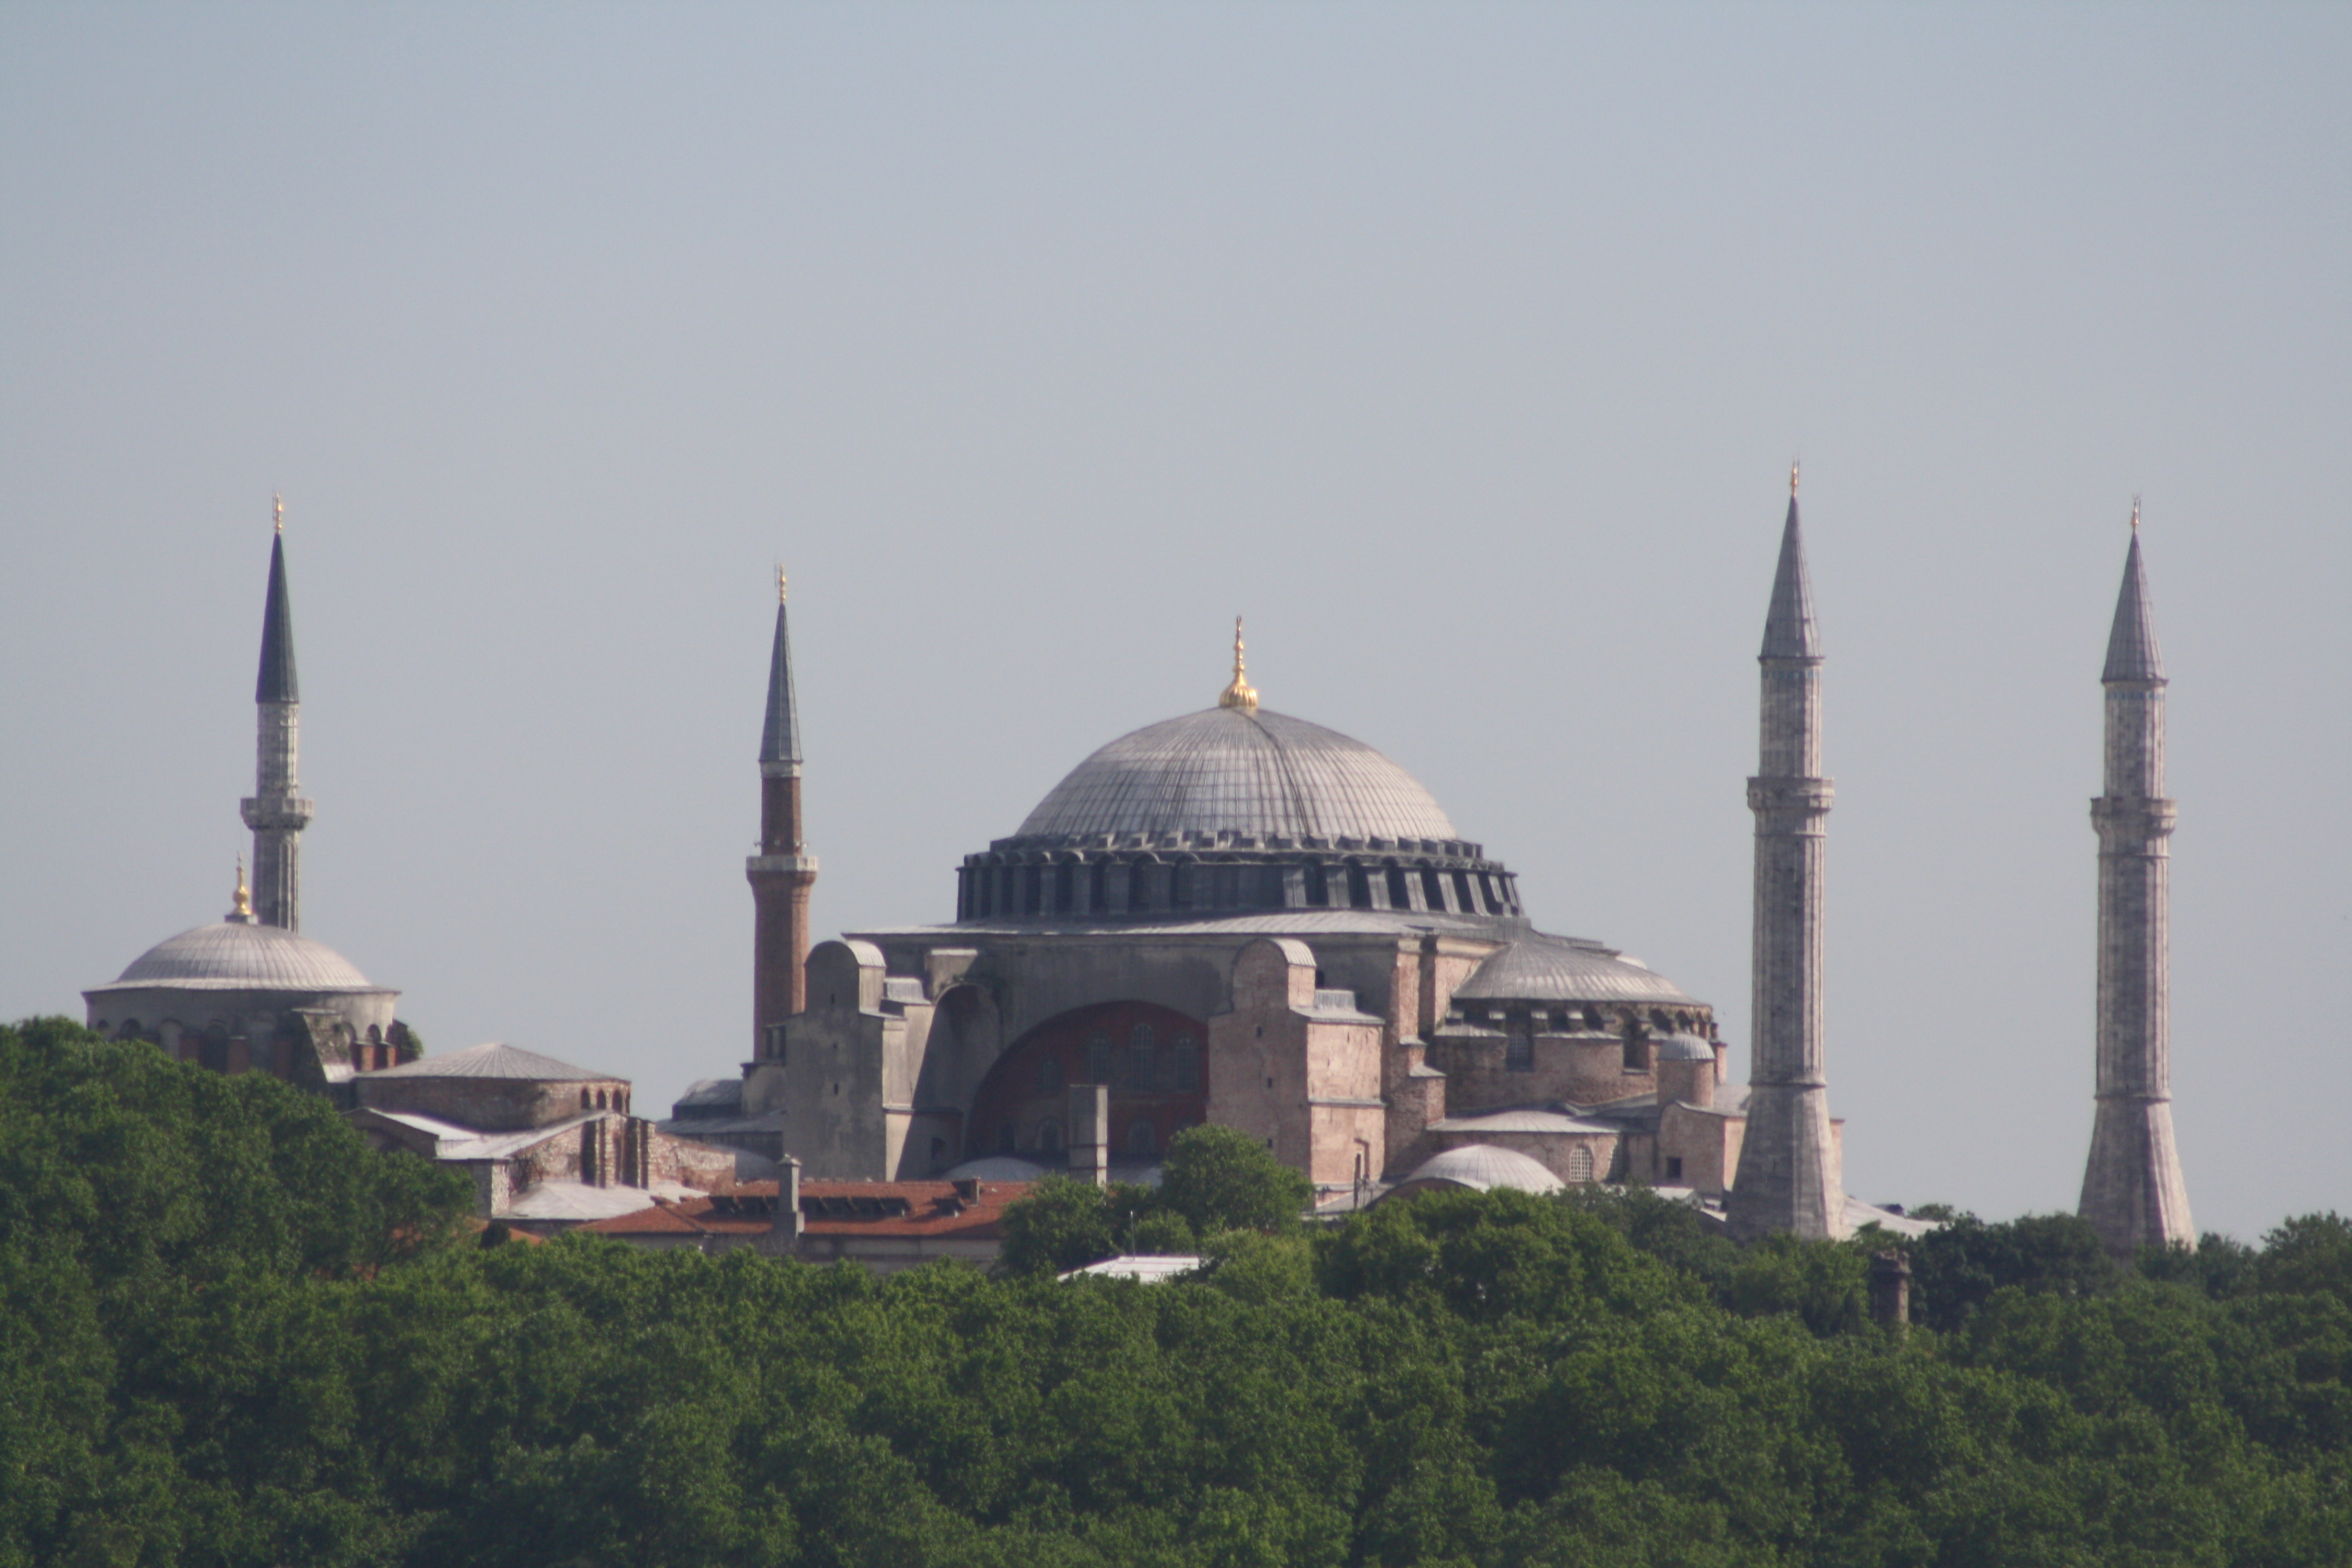 7 Reasons Why Constantinople Was So Important